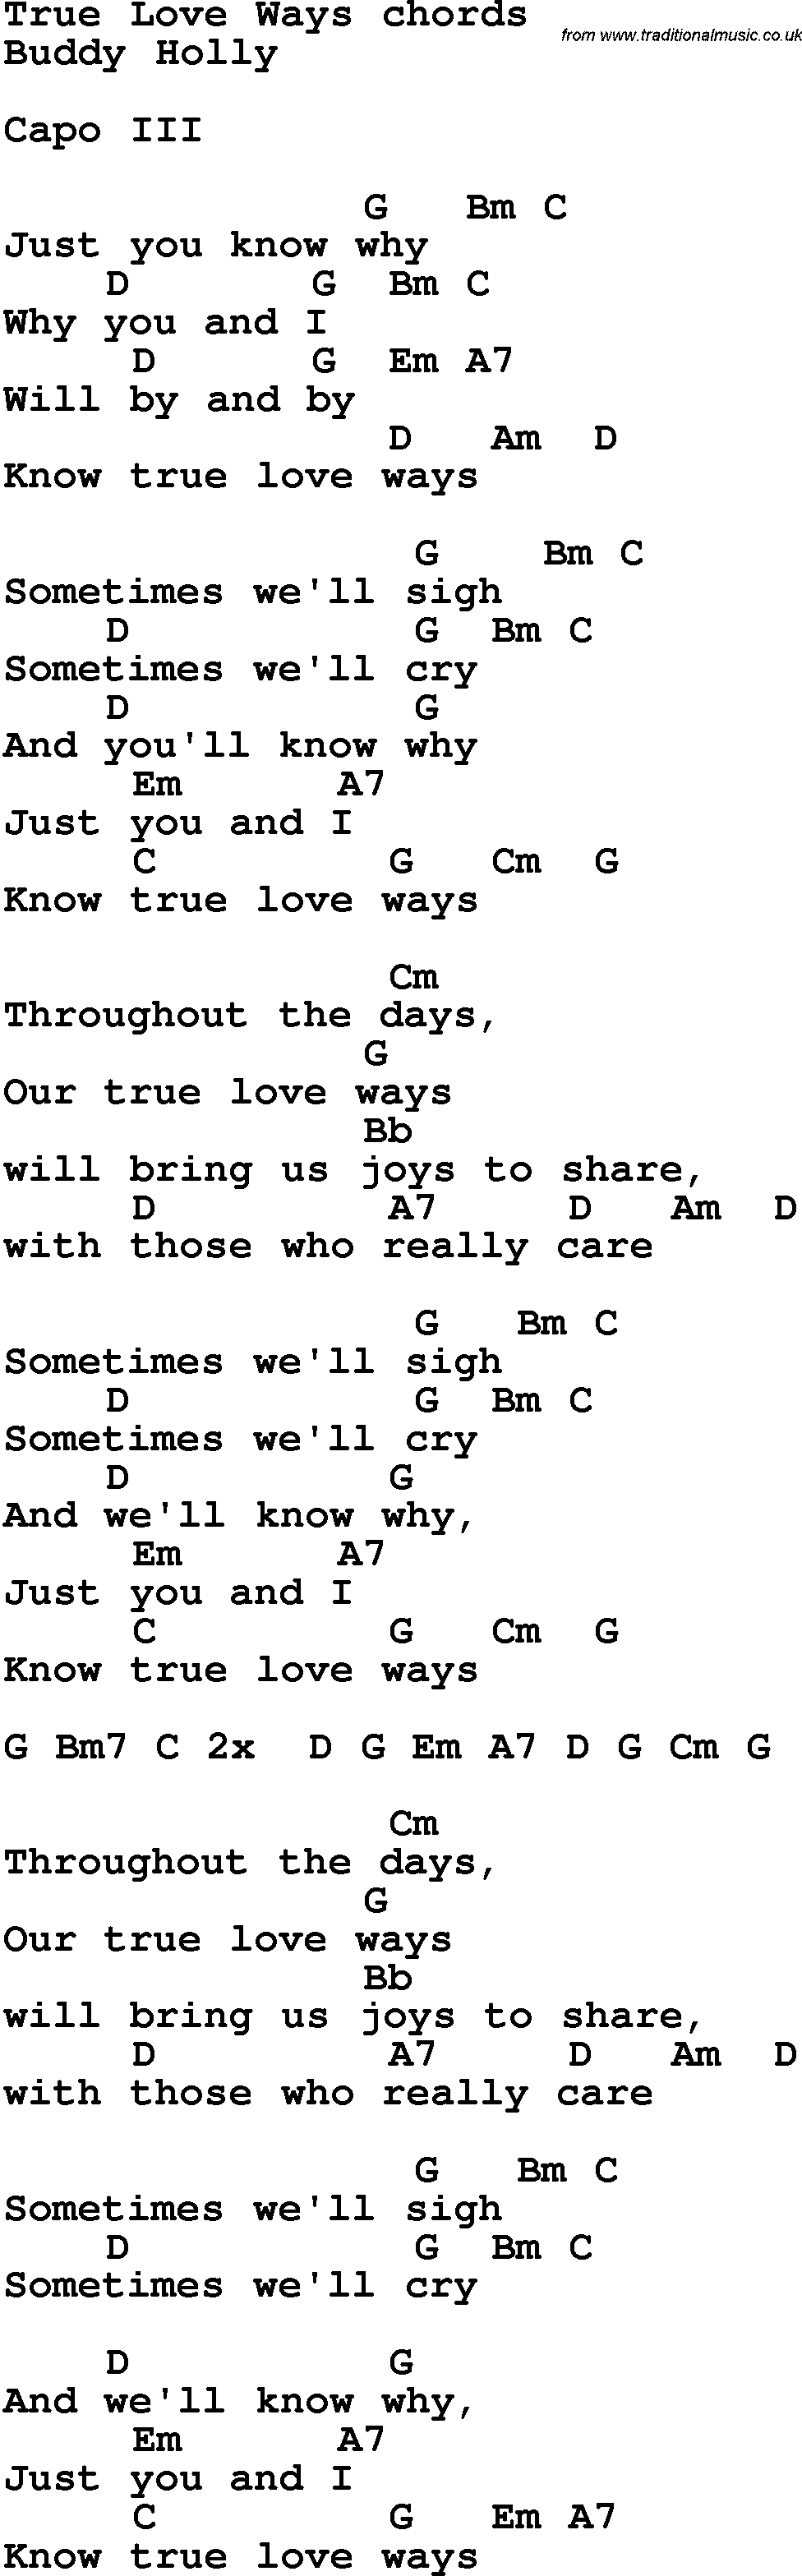 Song Lyrics with guitar chords for True Love Ways